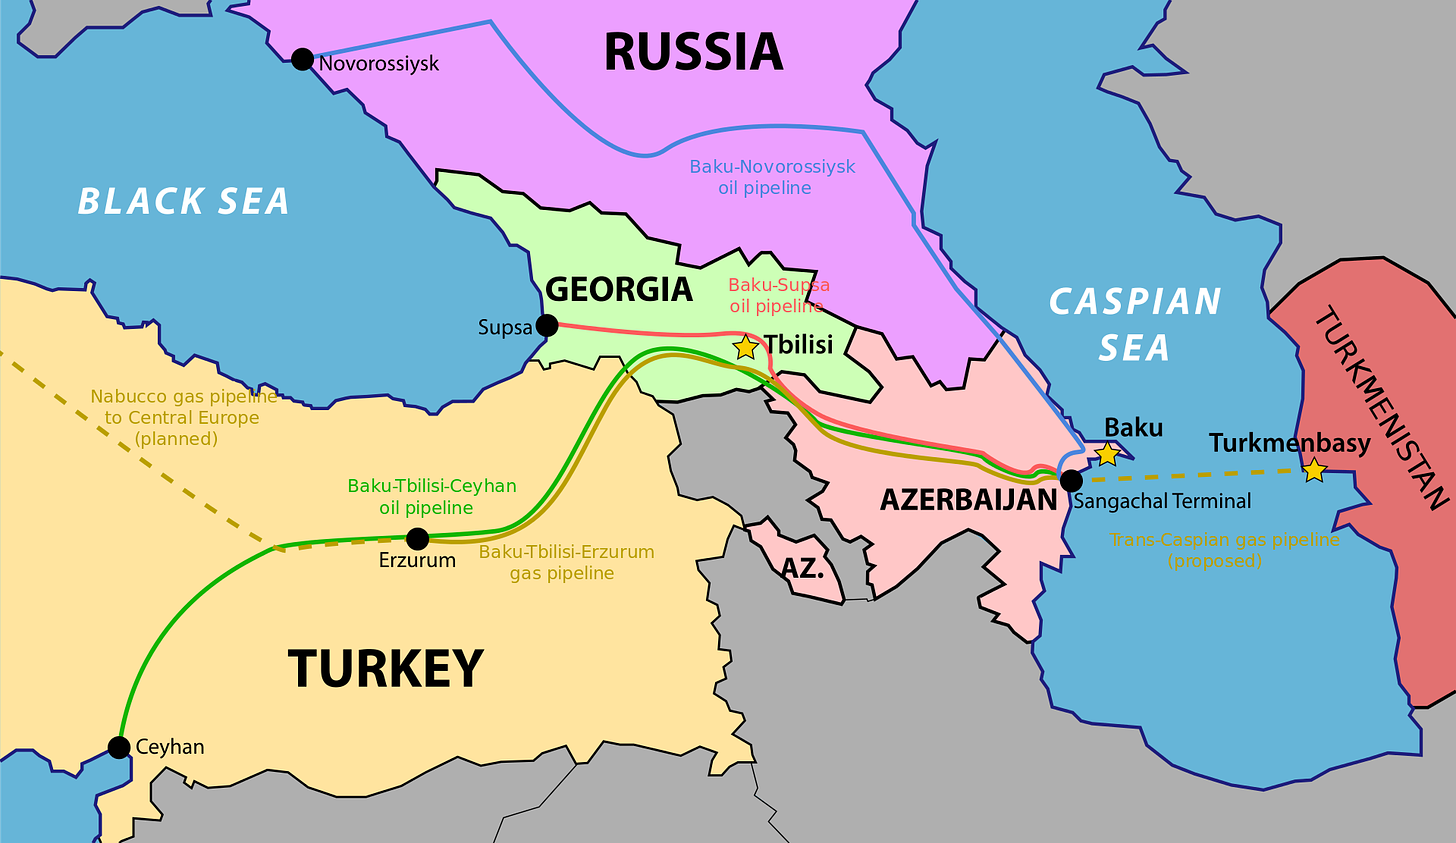 The Trans/Caspian gas pipeline would run under the Caspian Sea from Türkmenbaşy to the Sangachal Terminal, where it would connect with the existing pipeline to Erzurum in Turkey, which in turn would be connected to the Southern Gas Corridor, thus taking natural gas from Turkmenistan to Central Europe.